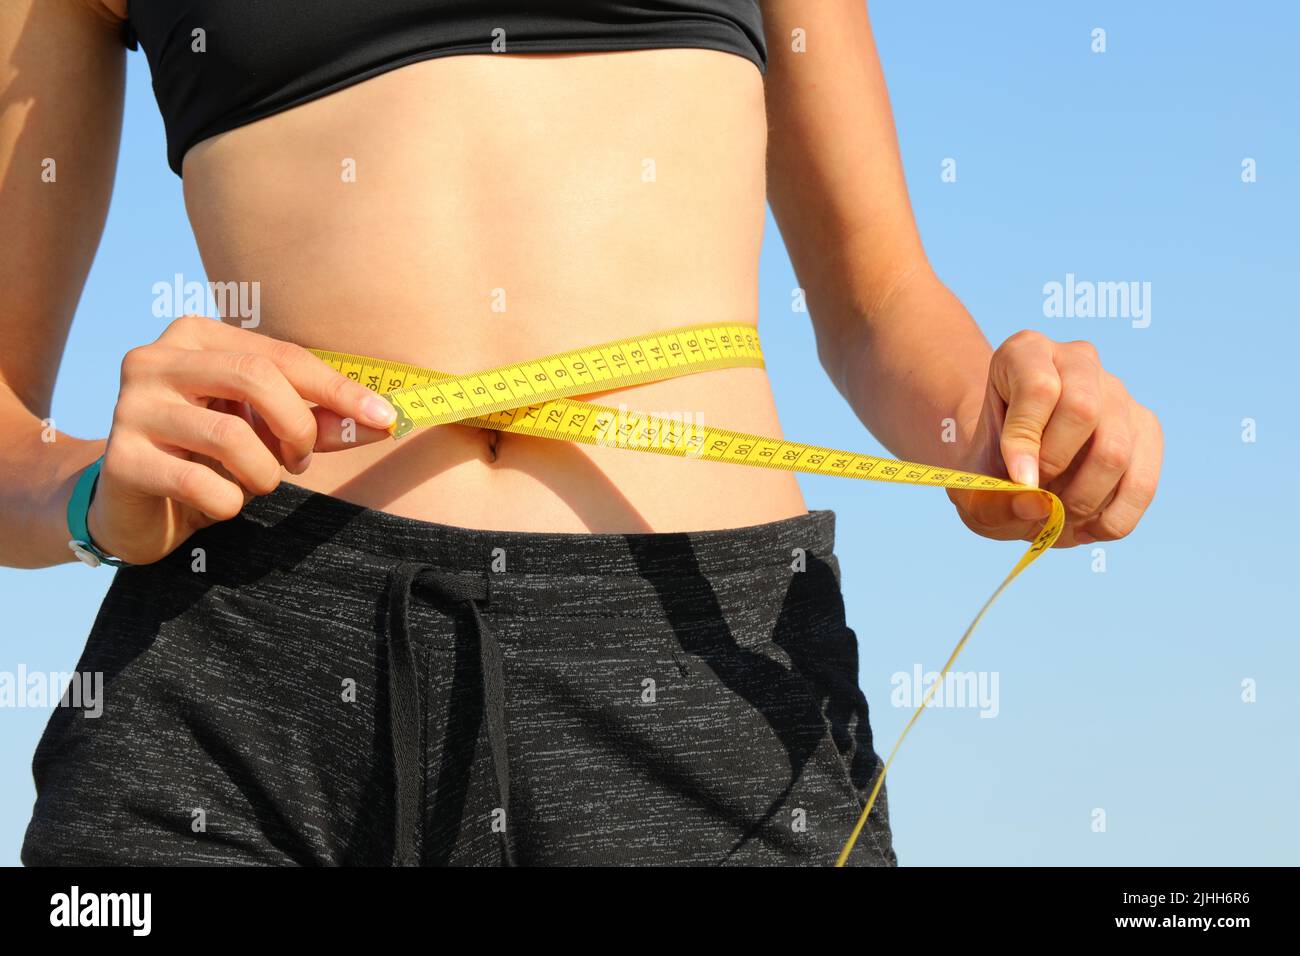 belly of the thin girl while measuring her waist with the yellow tape measure Stock Photo